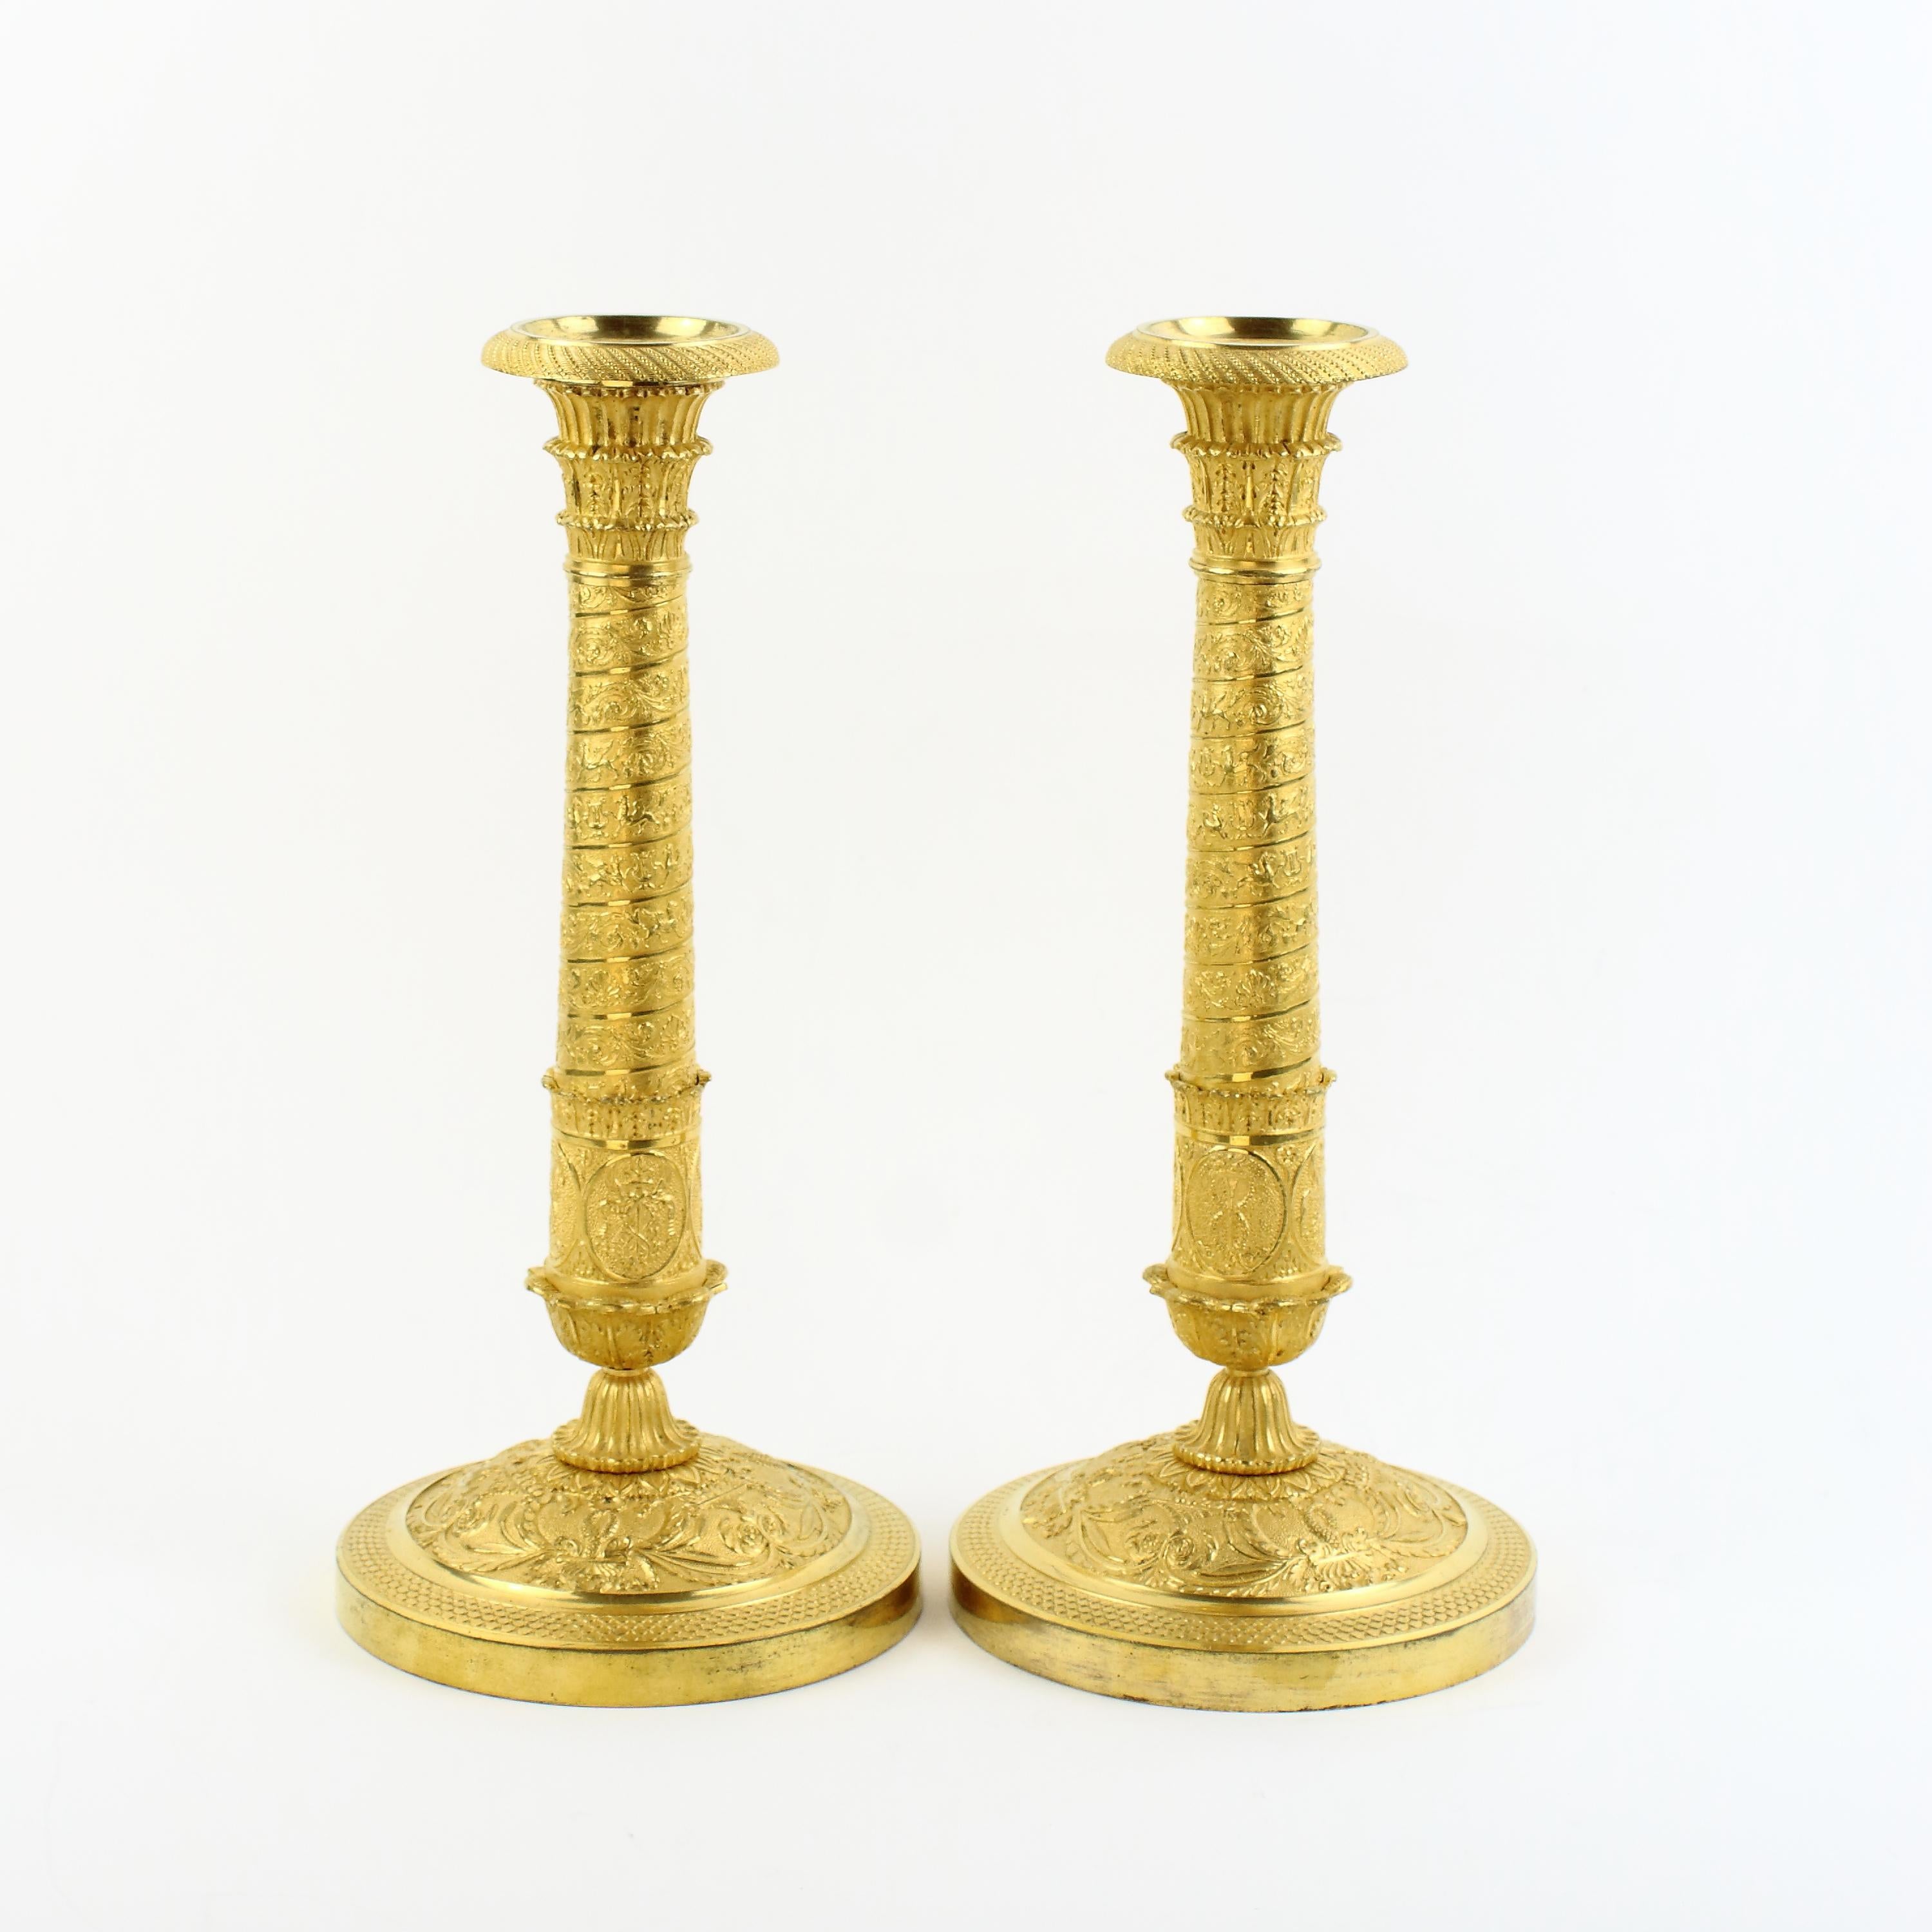 Pair of early 19th century Empire Trajan's column ormolu candlesticks in the manner of P.-P. Thomire (1751-1843):

Pair of large Empire ormolu candlesticks, the stem ressembling the Trajan's column or the column of the place Vendôme in Paris